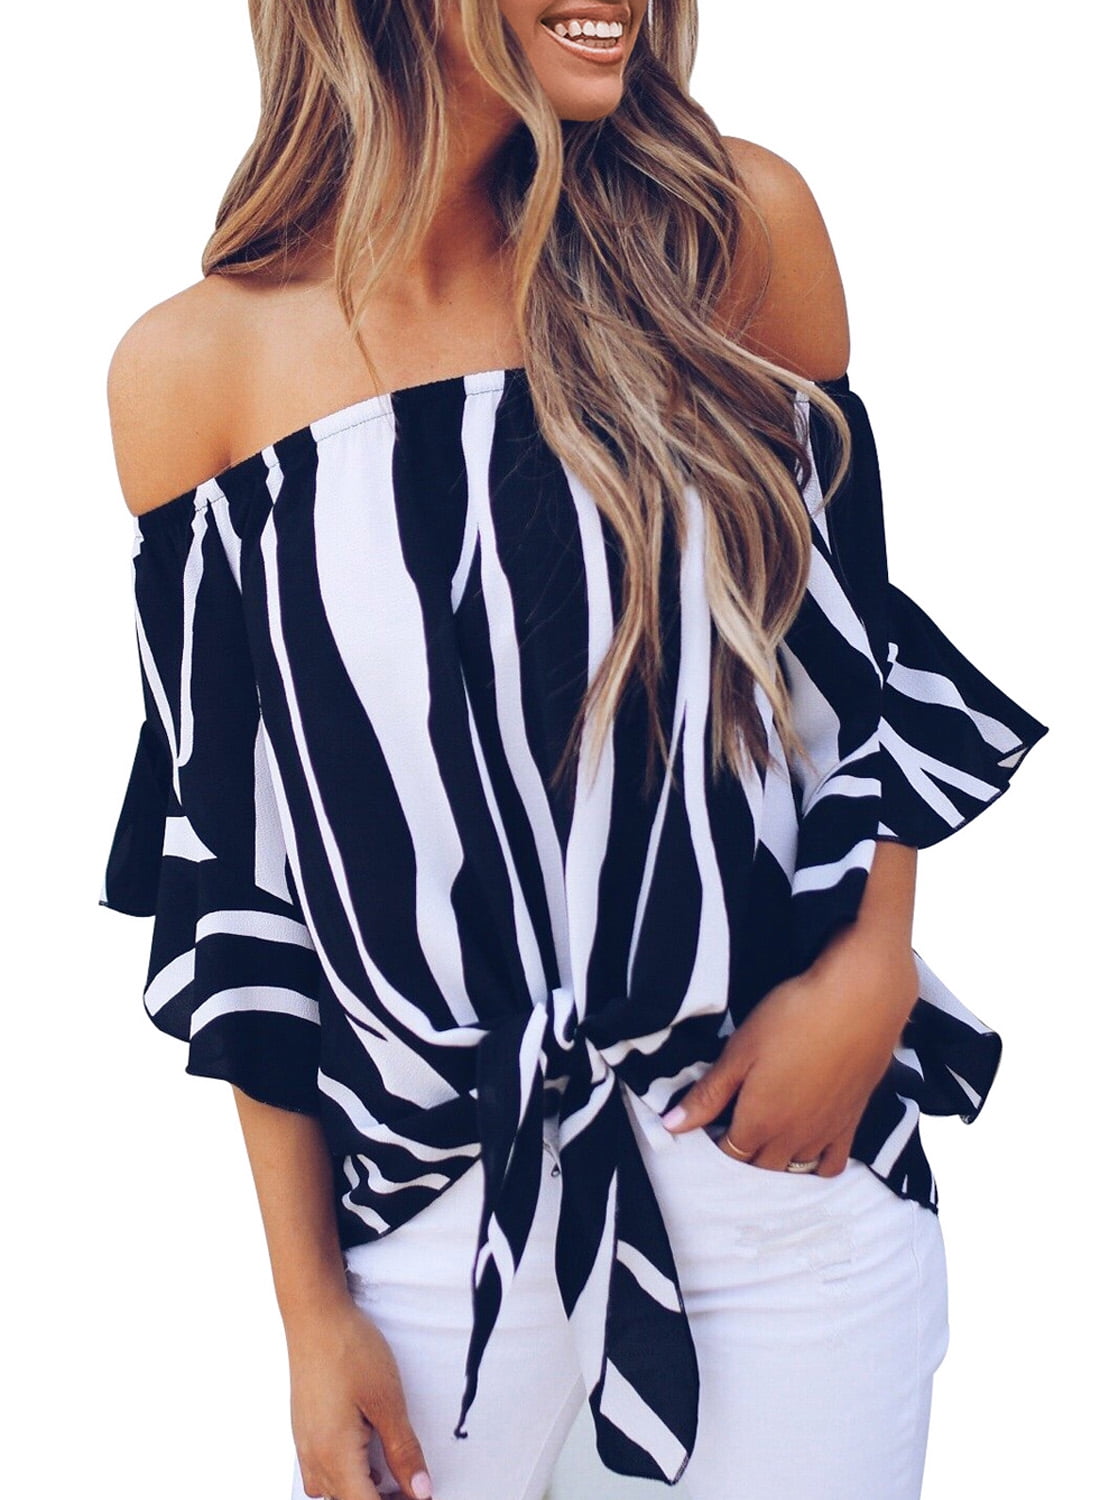 Aleumdr Womens Striped Print Off Shoulder 3 4 Flare Sleeve Tie Knot Blouses Tops Casual Shirts